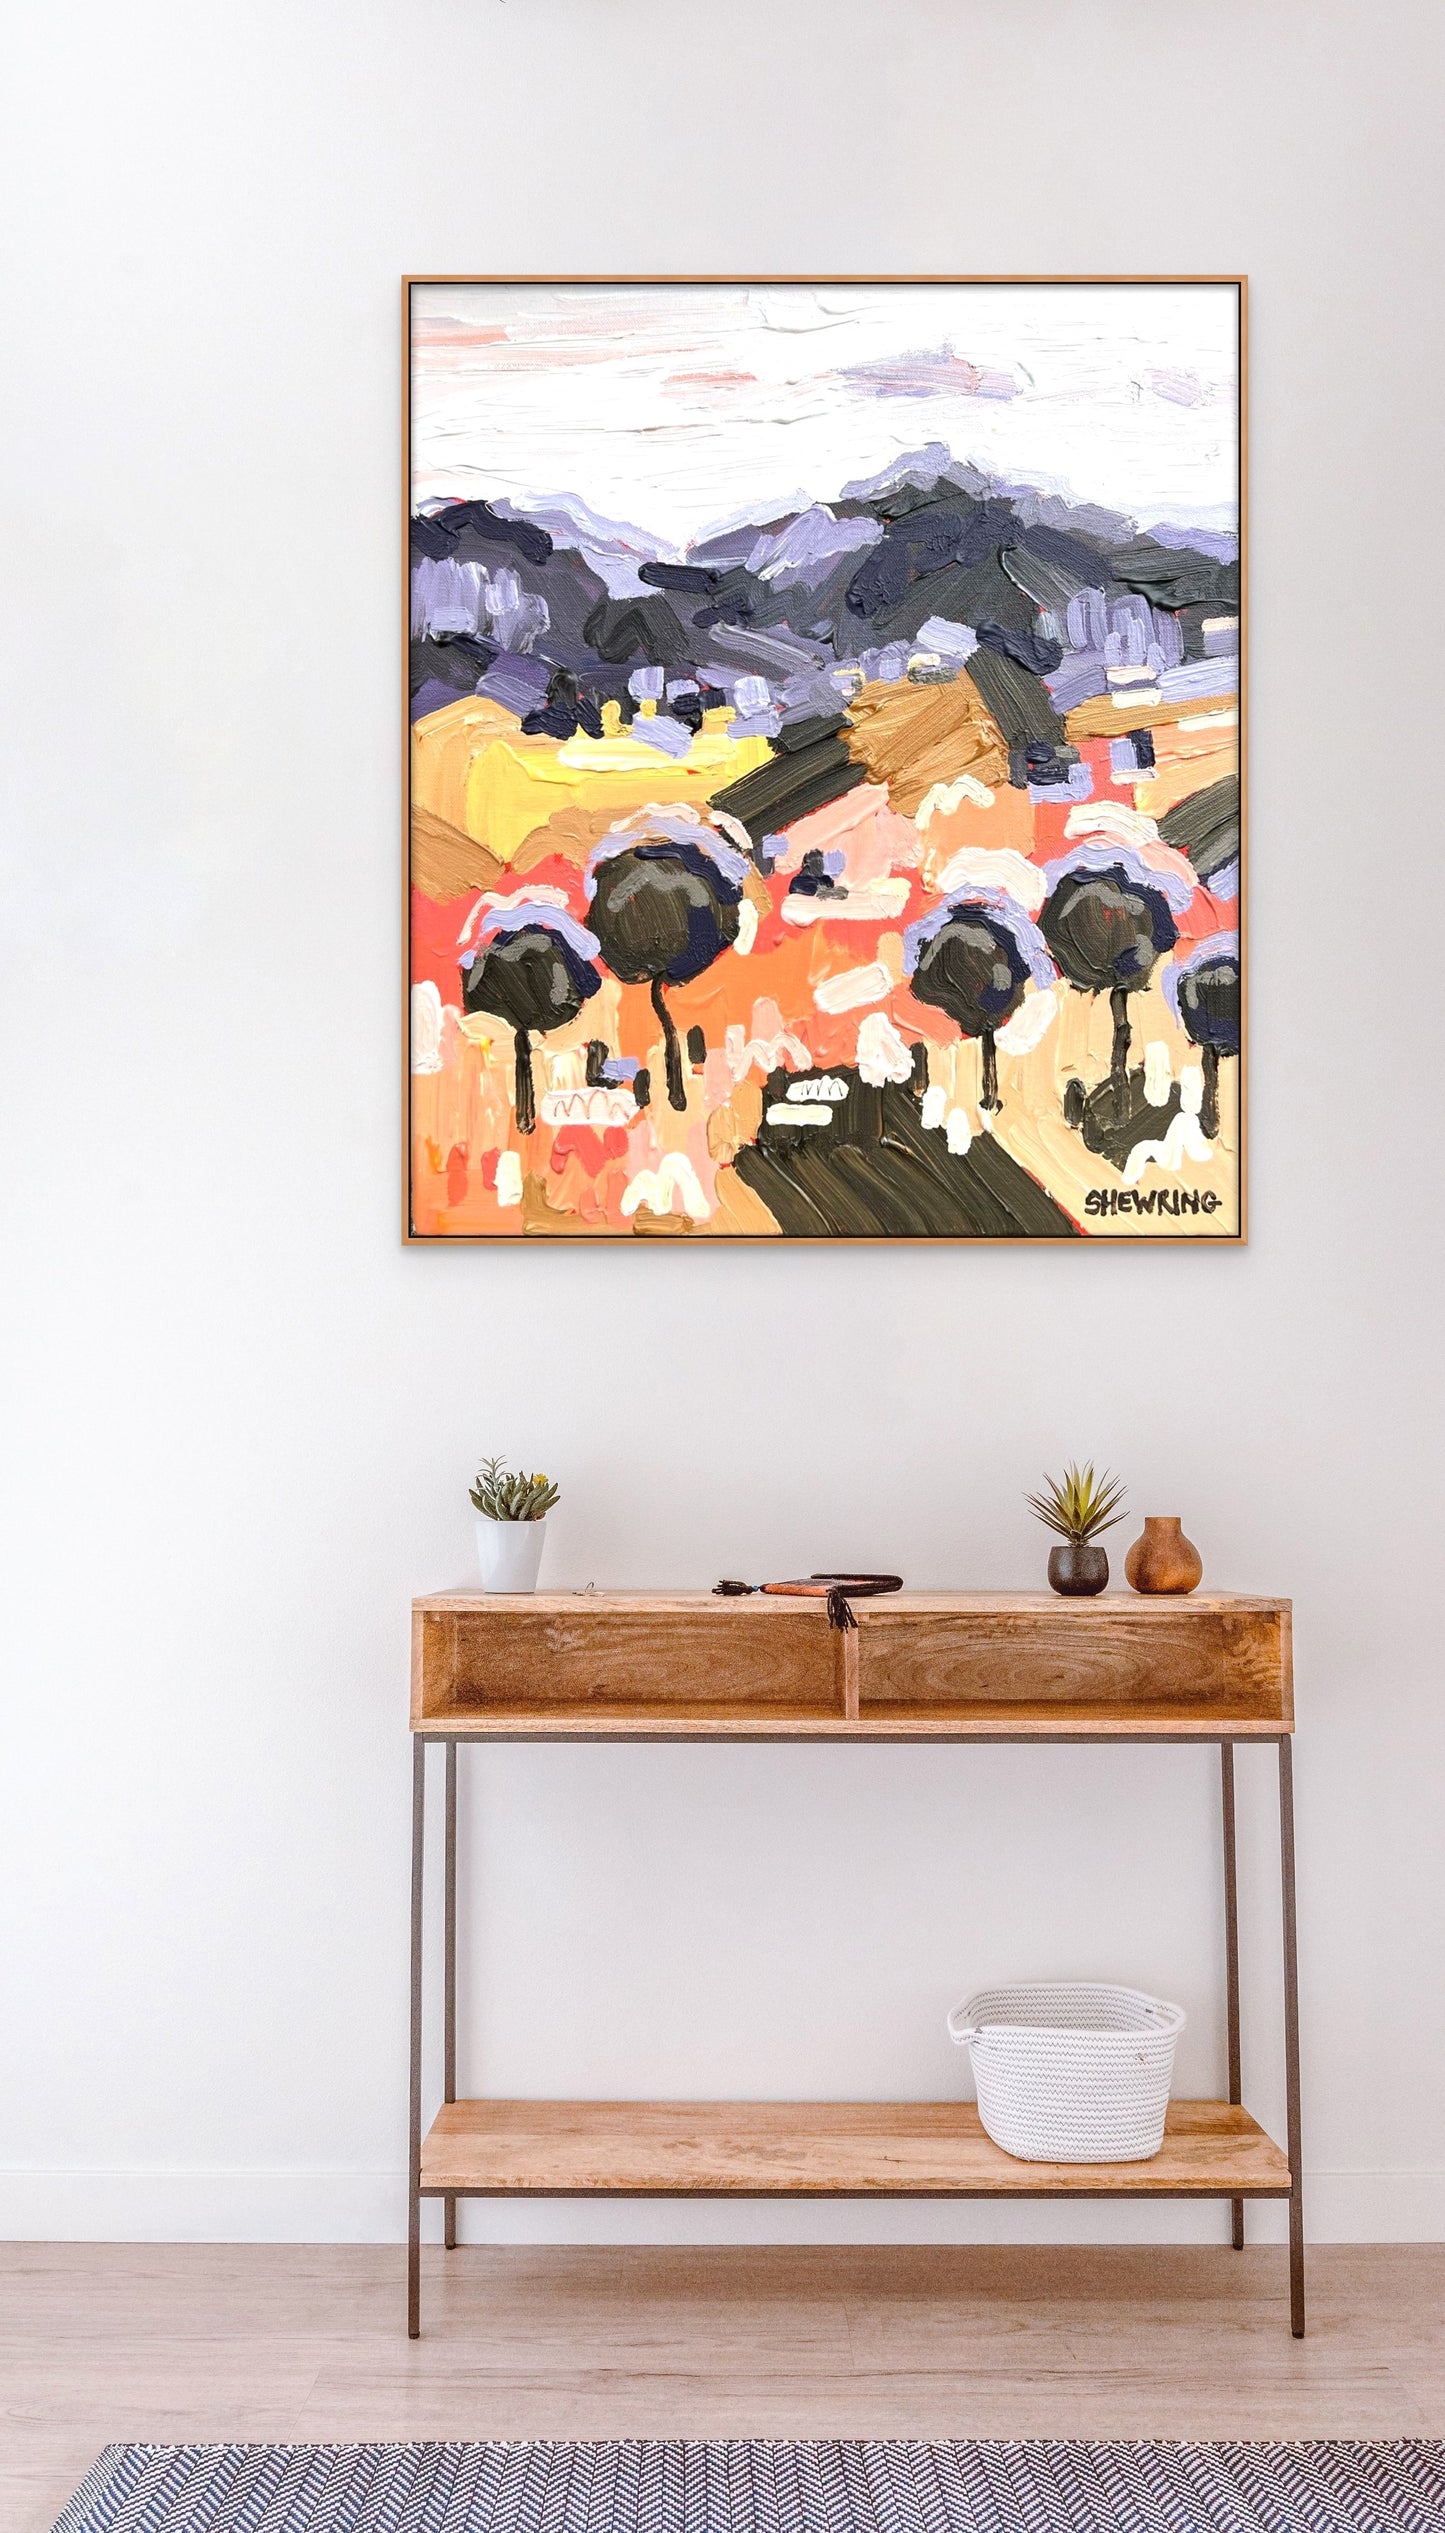 Sunset Valley - Limited Edition Print